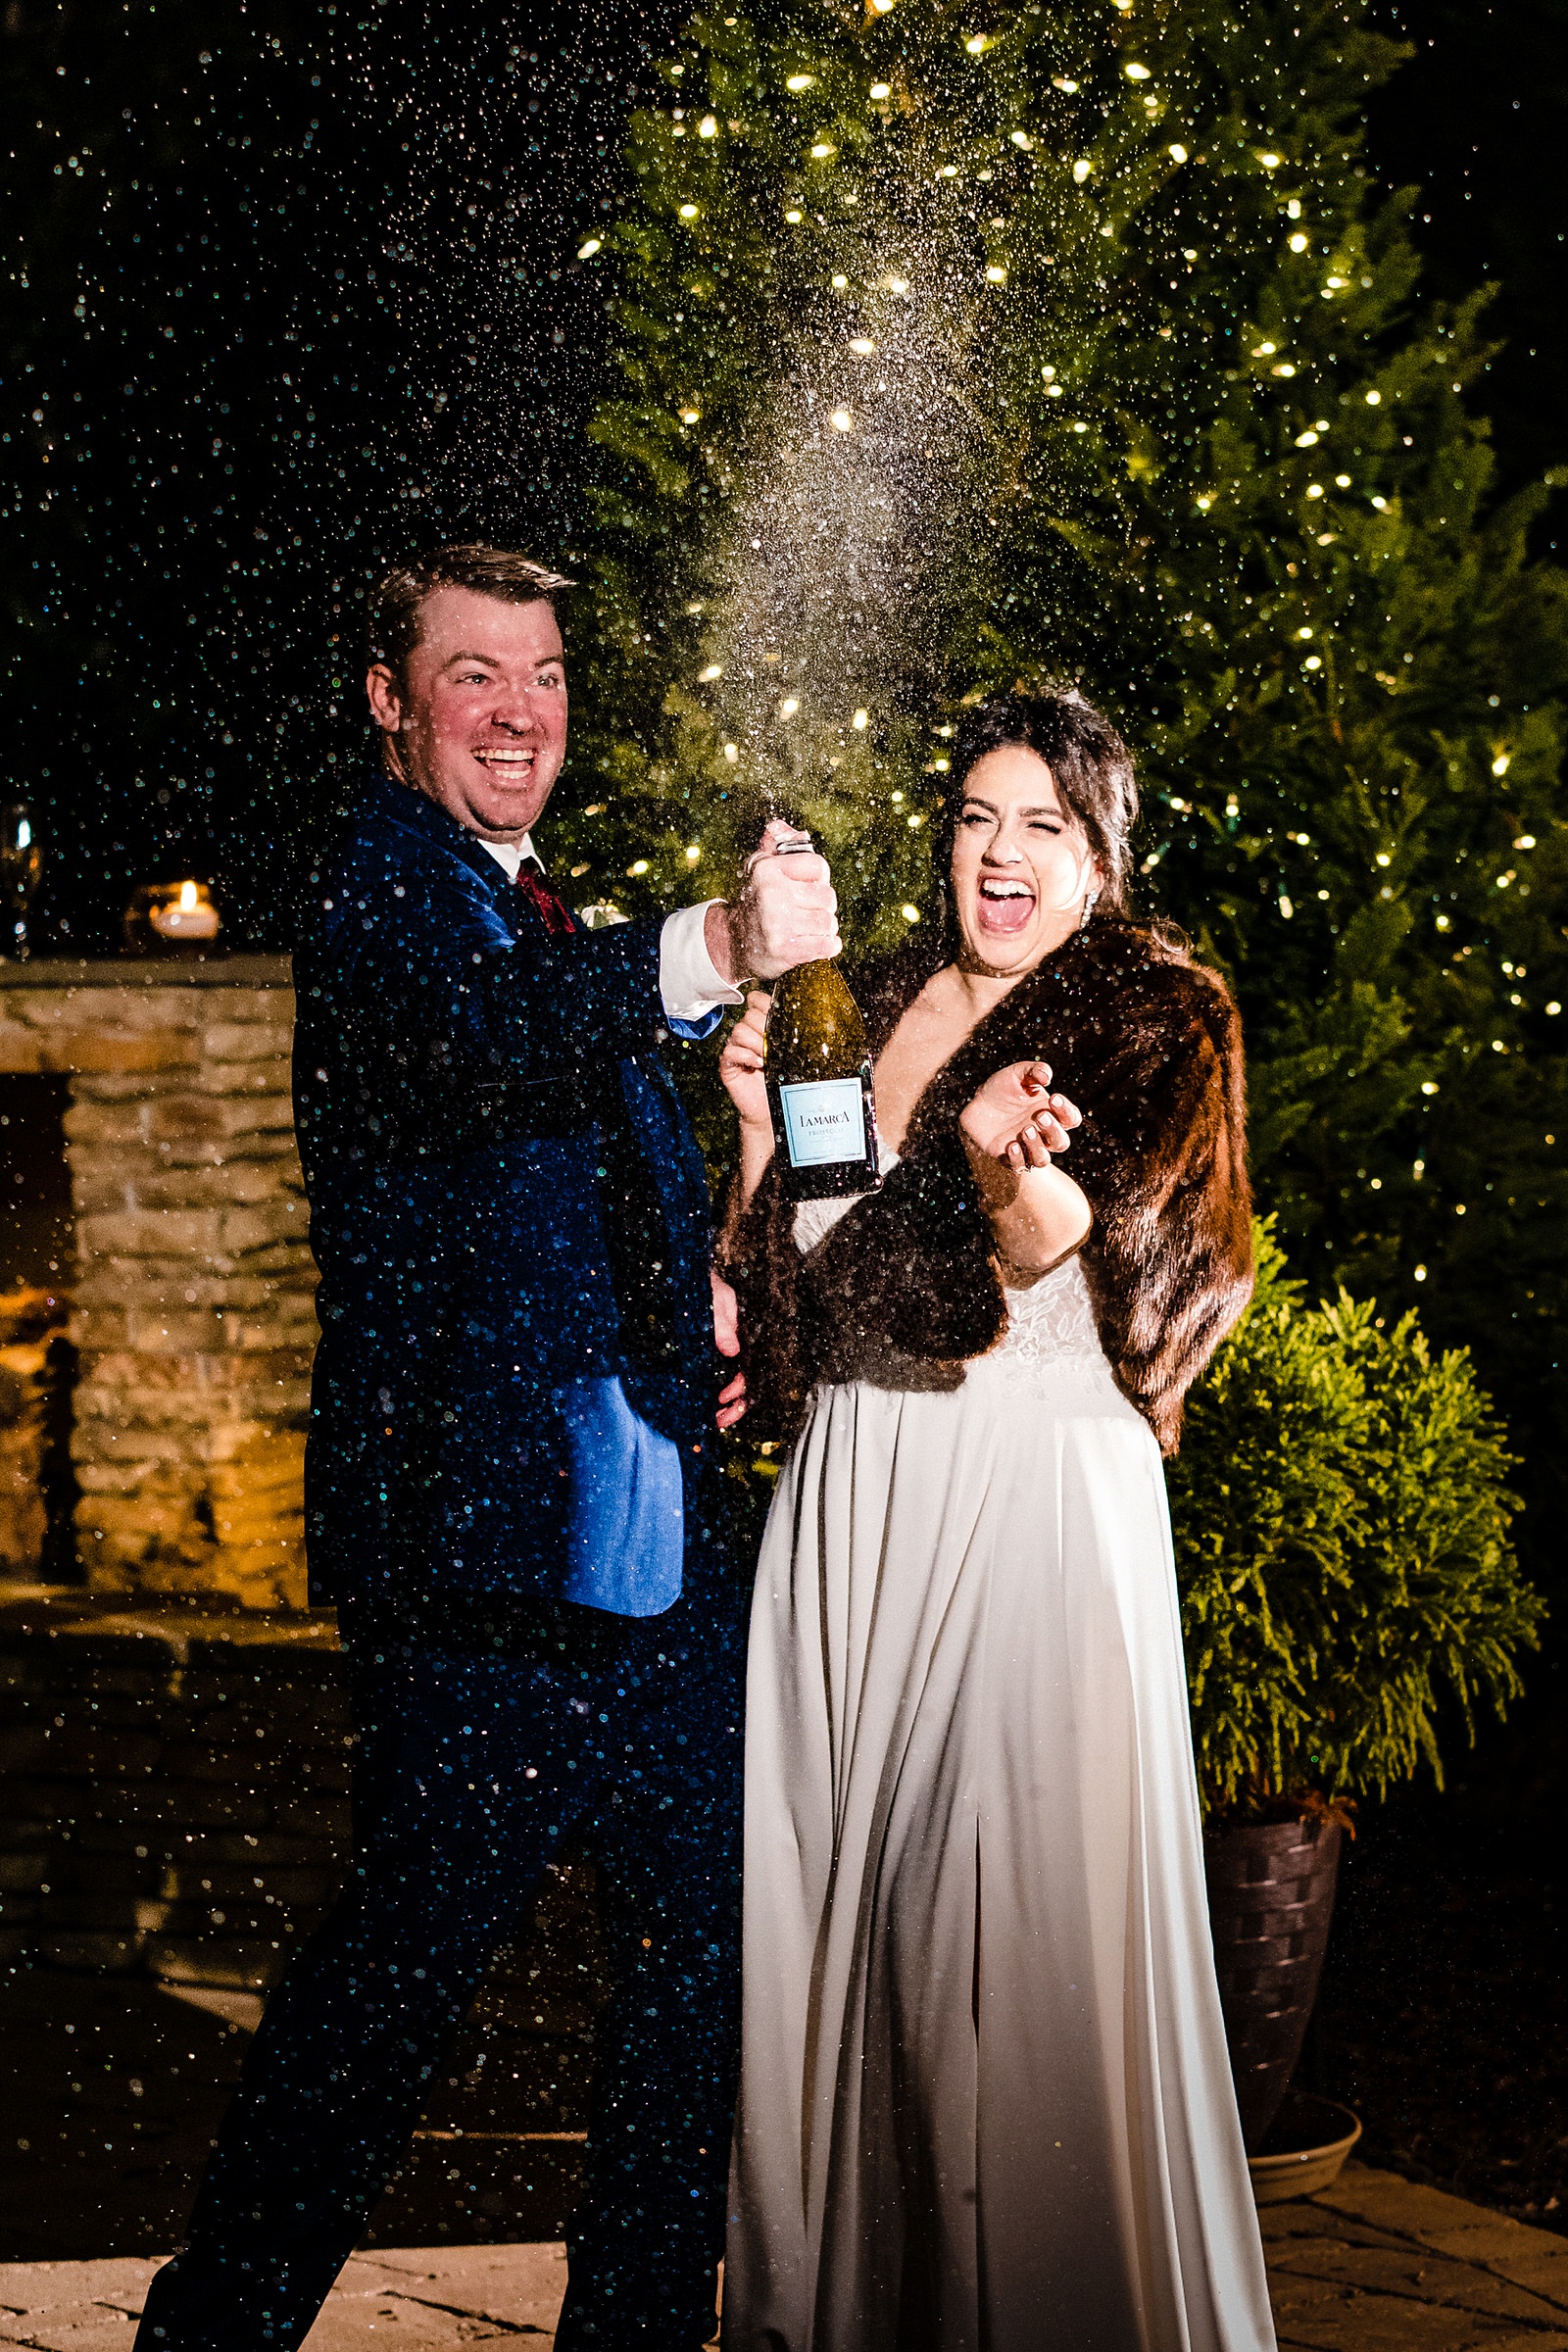 Get an epic champagne spray shot at your wedding!